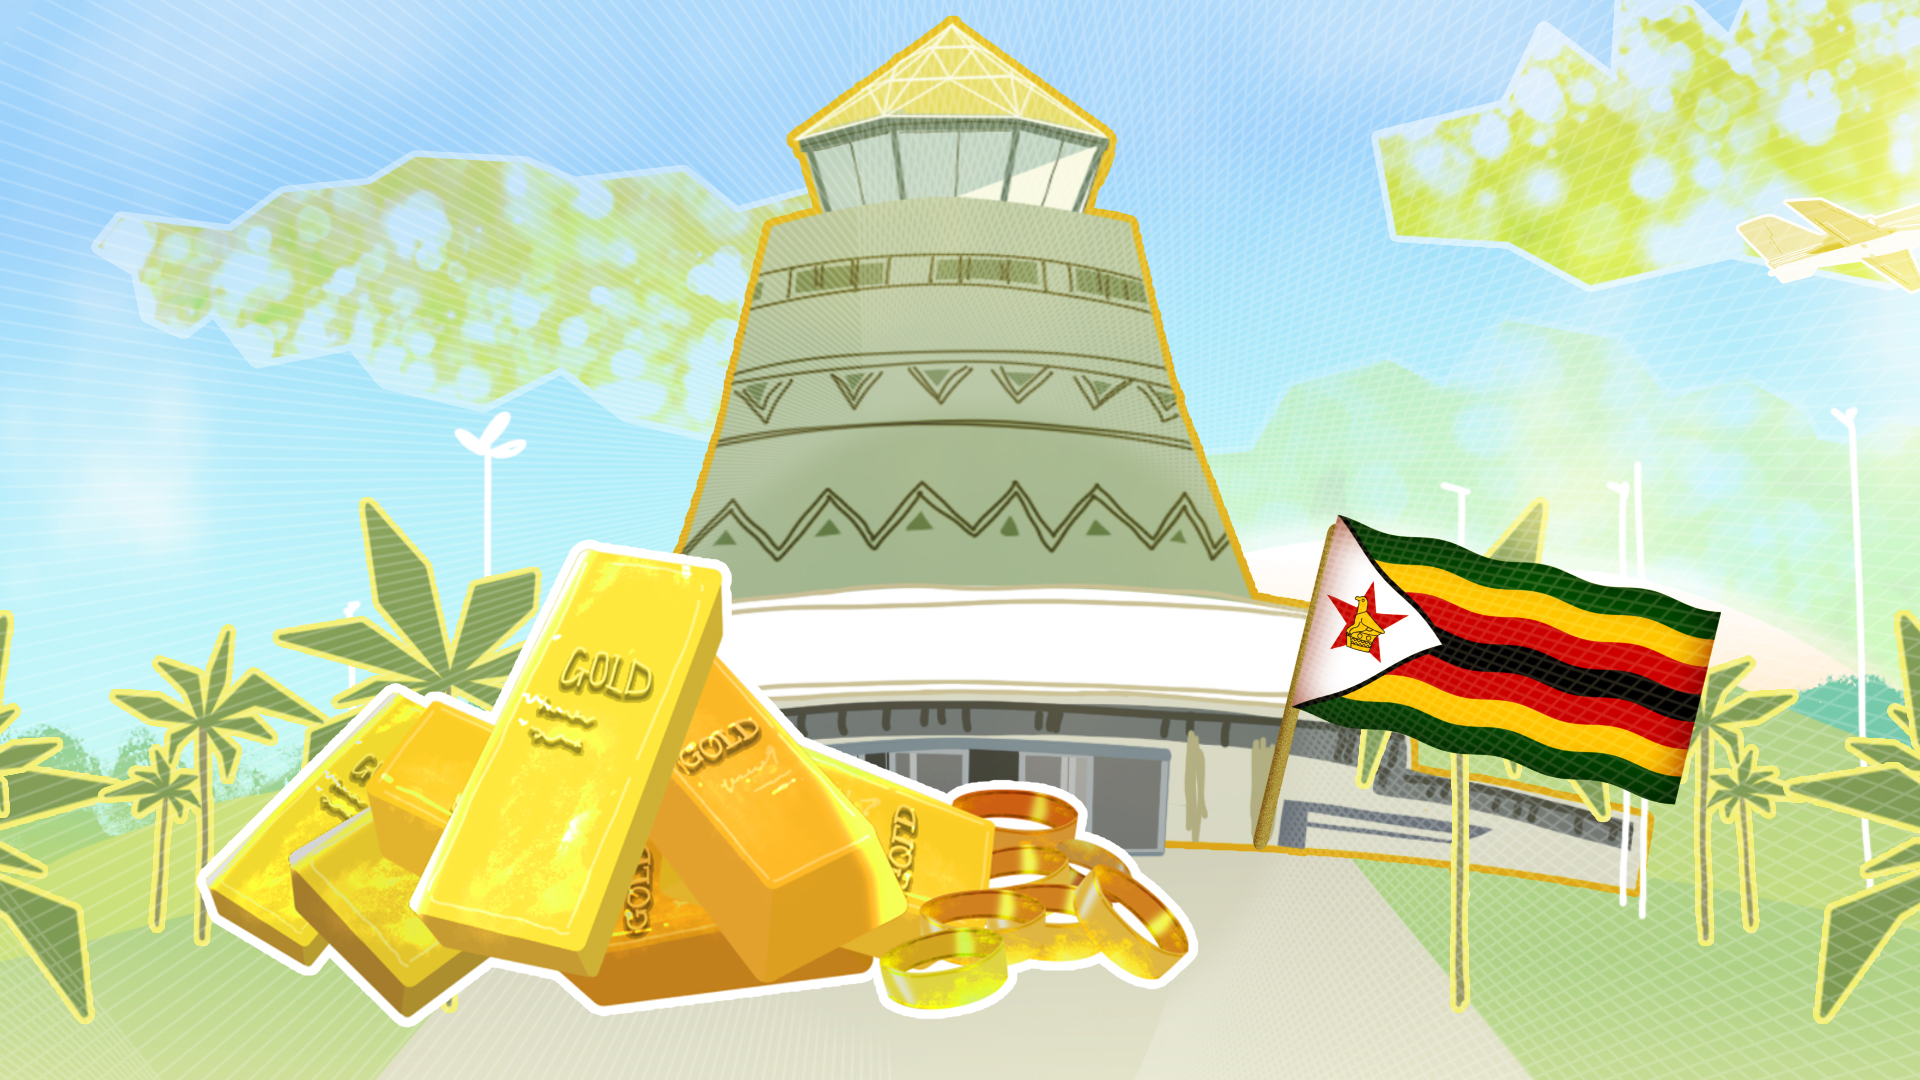 How Zimbabwe uses gold smuggling to evade sanctions choke